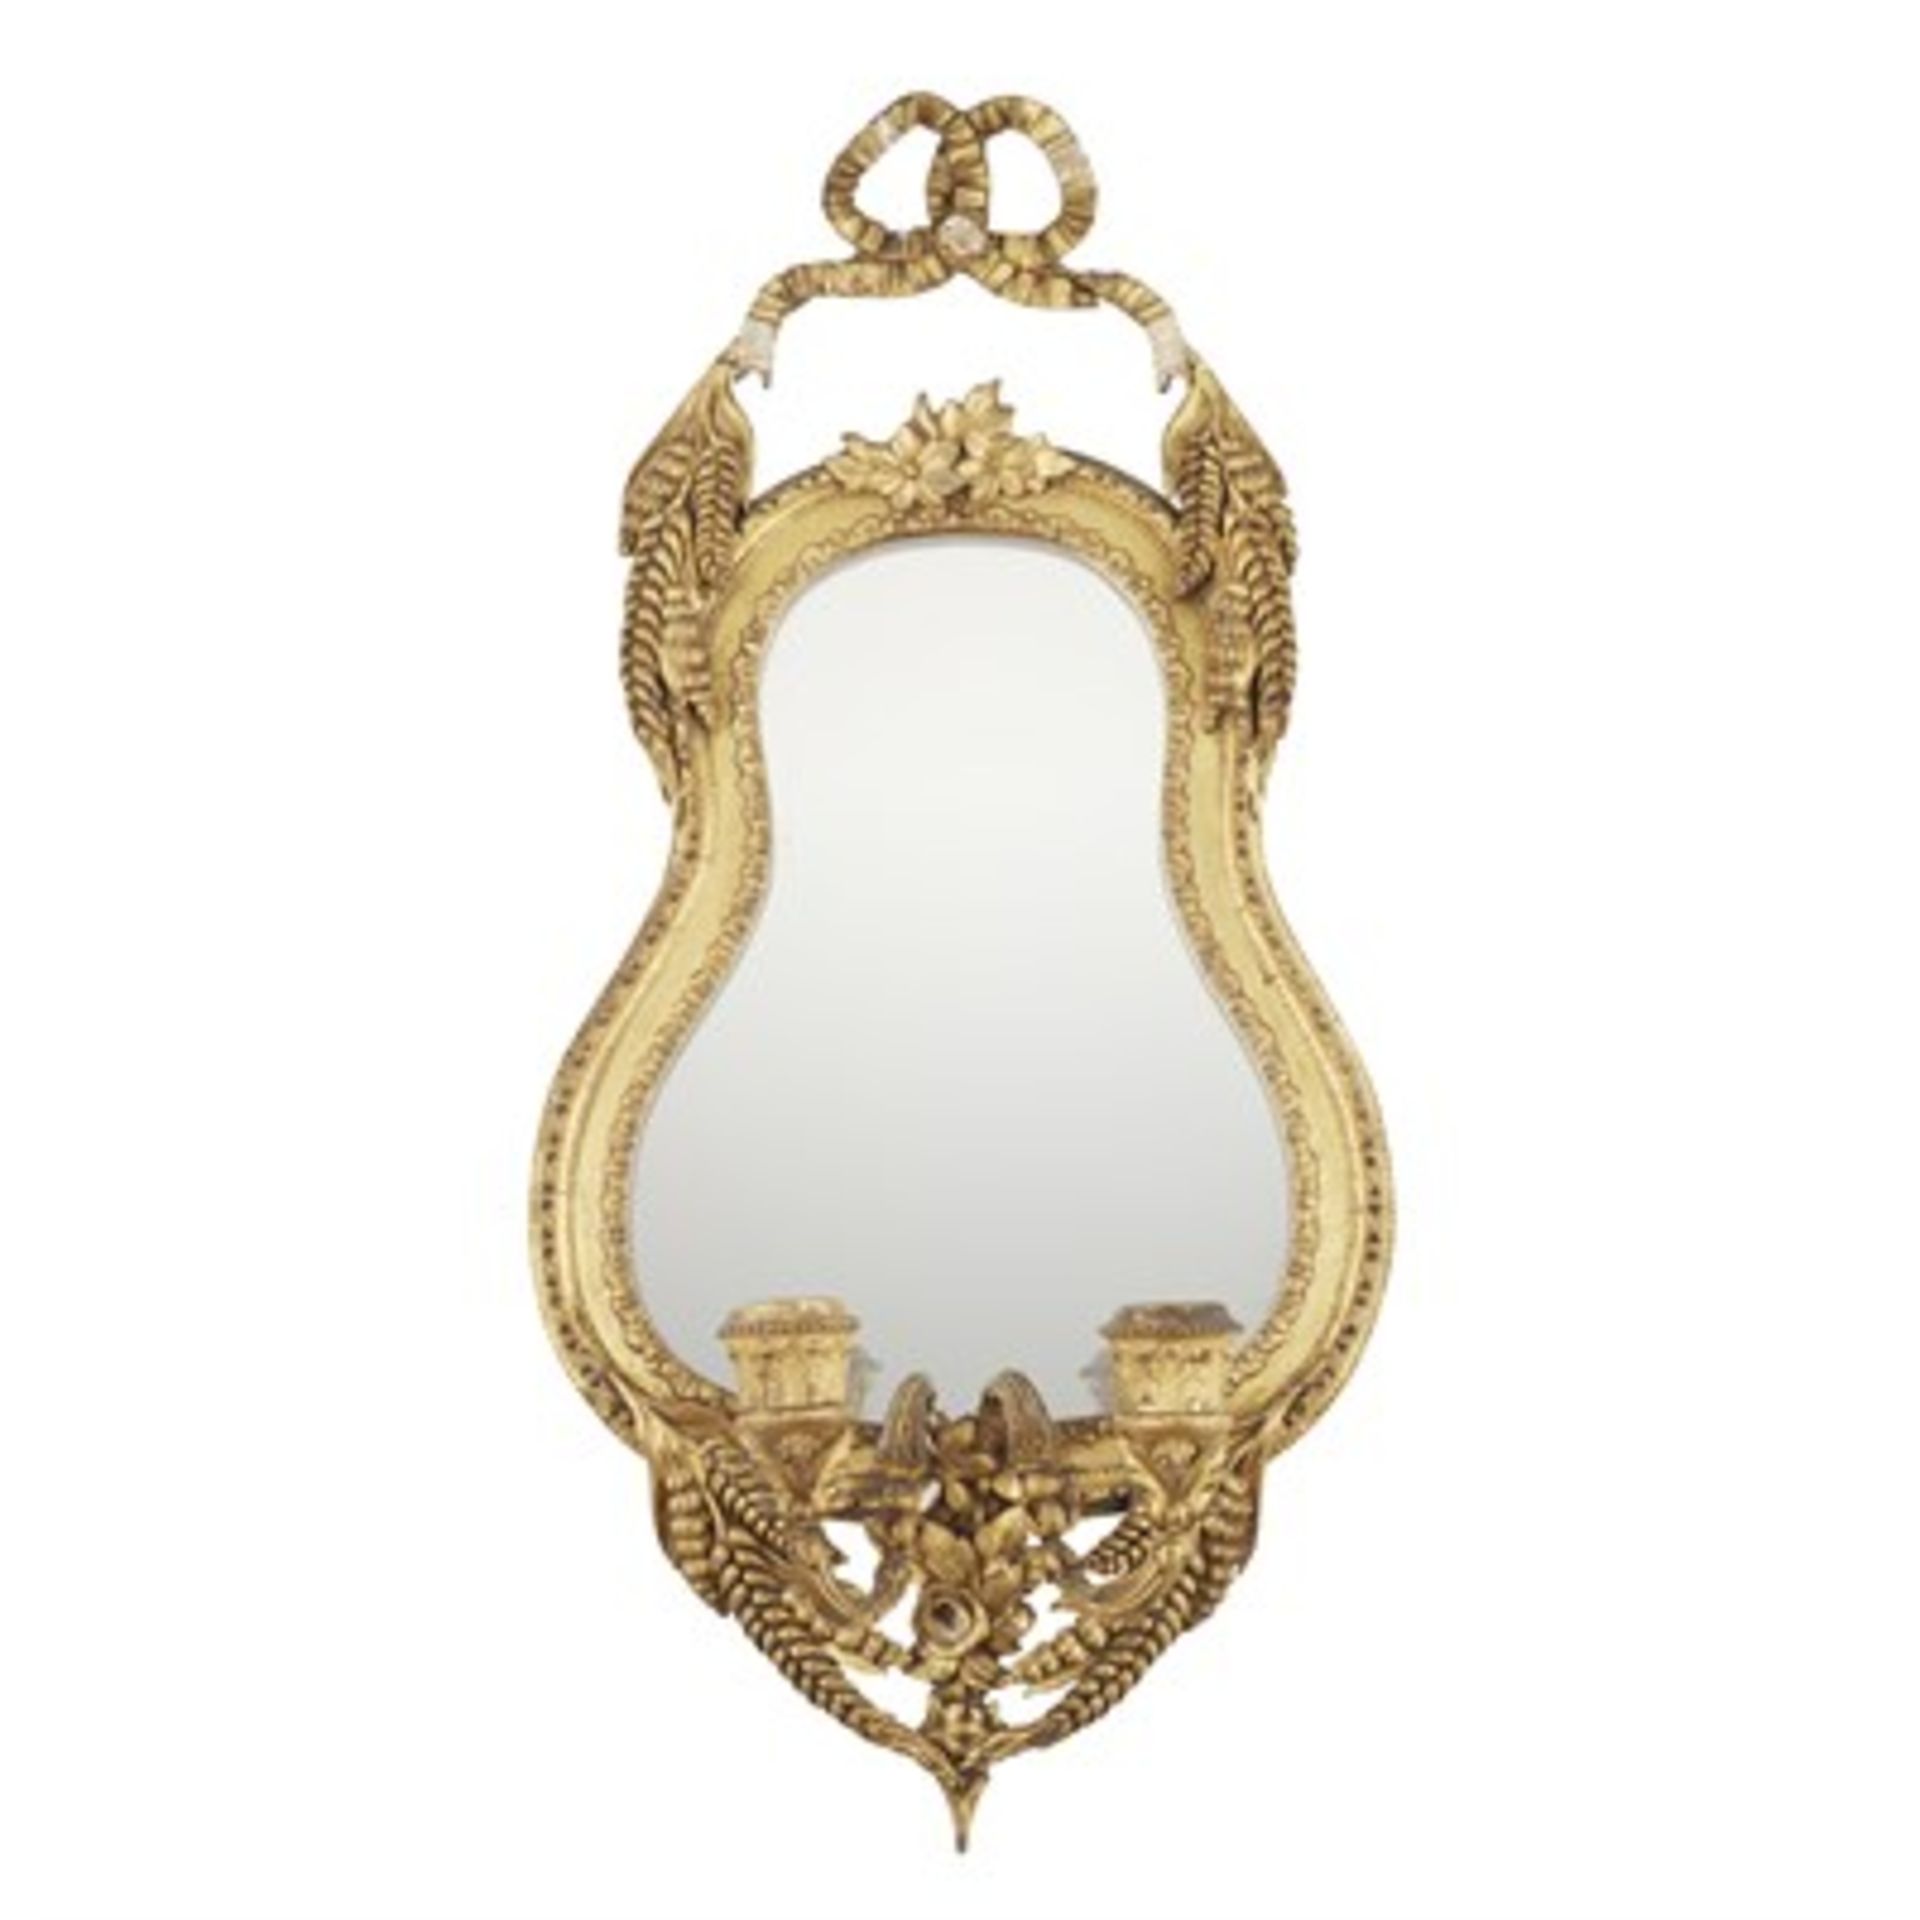 NEAR PAIR OF VICTORIAN GESSO AND GILTWOOD GIRANDOLE MIRRORS 19TH CENTURY the cartouche shaped mirror - Image 3 of 3